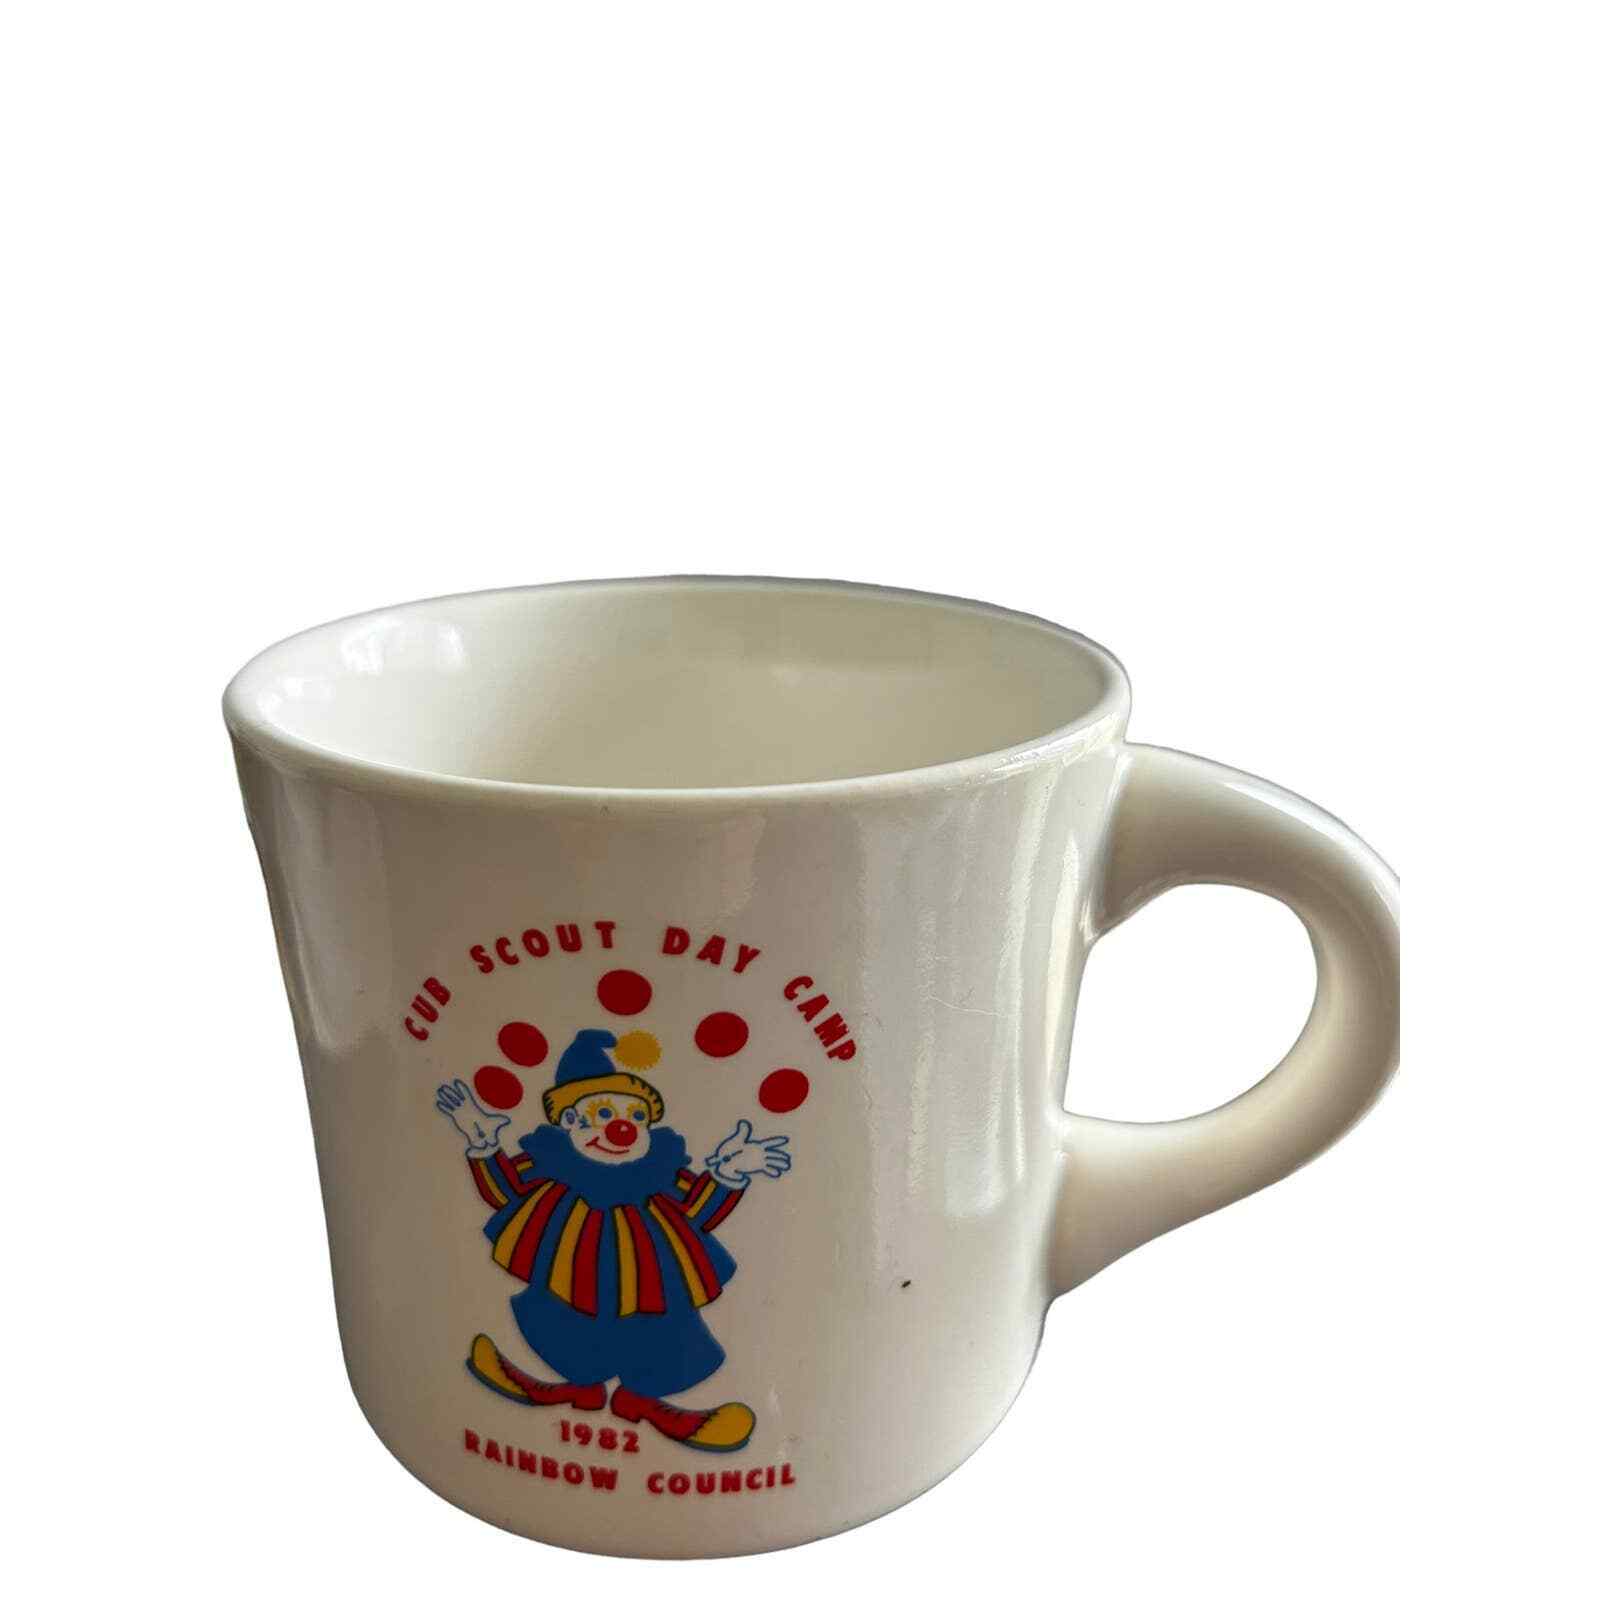 Vintage Cub Scout Day camp 1982 rainbow council coffee cup mug